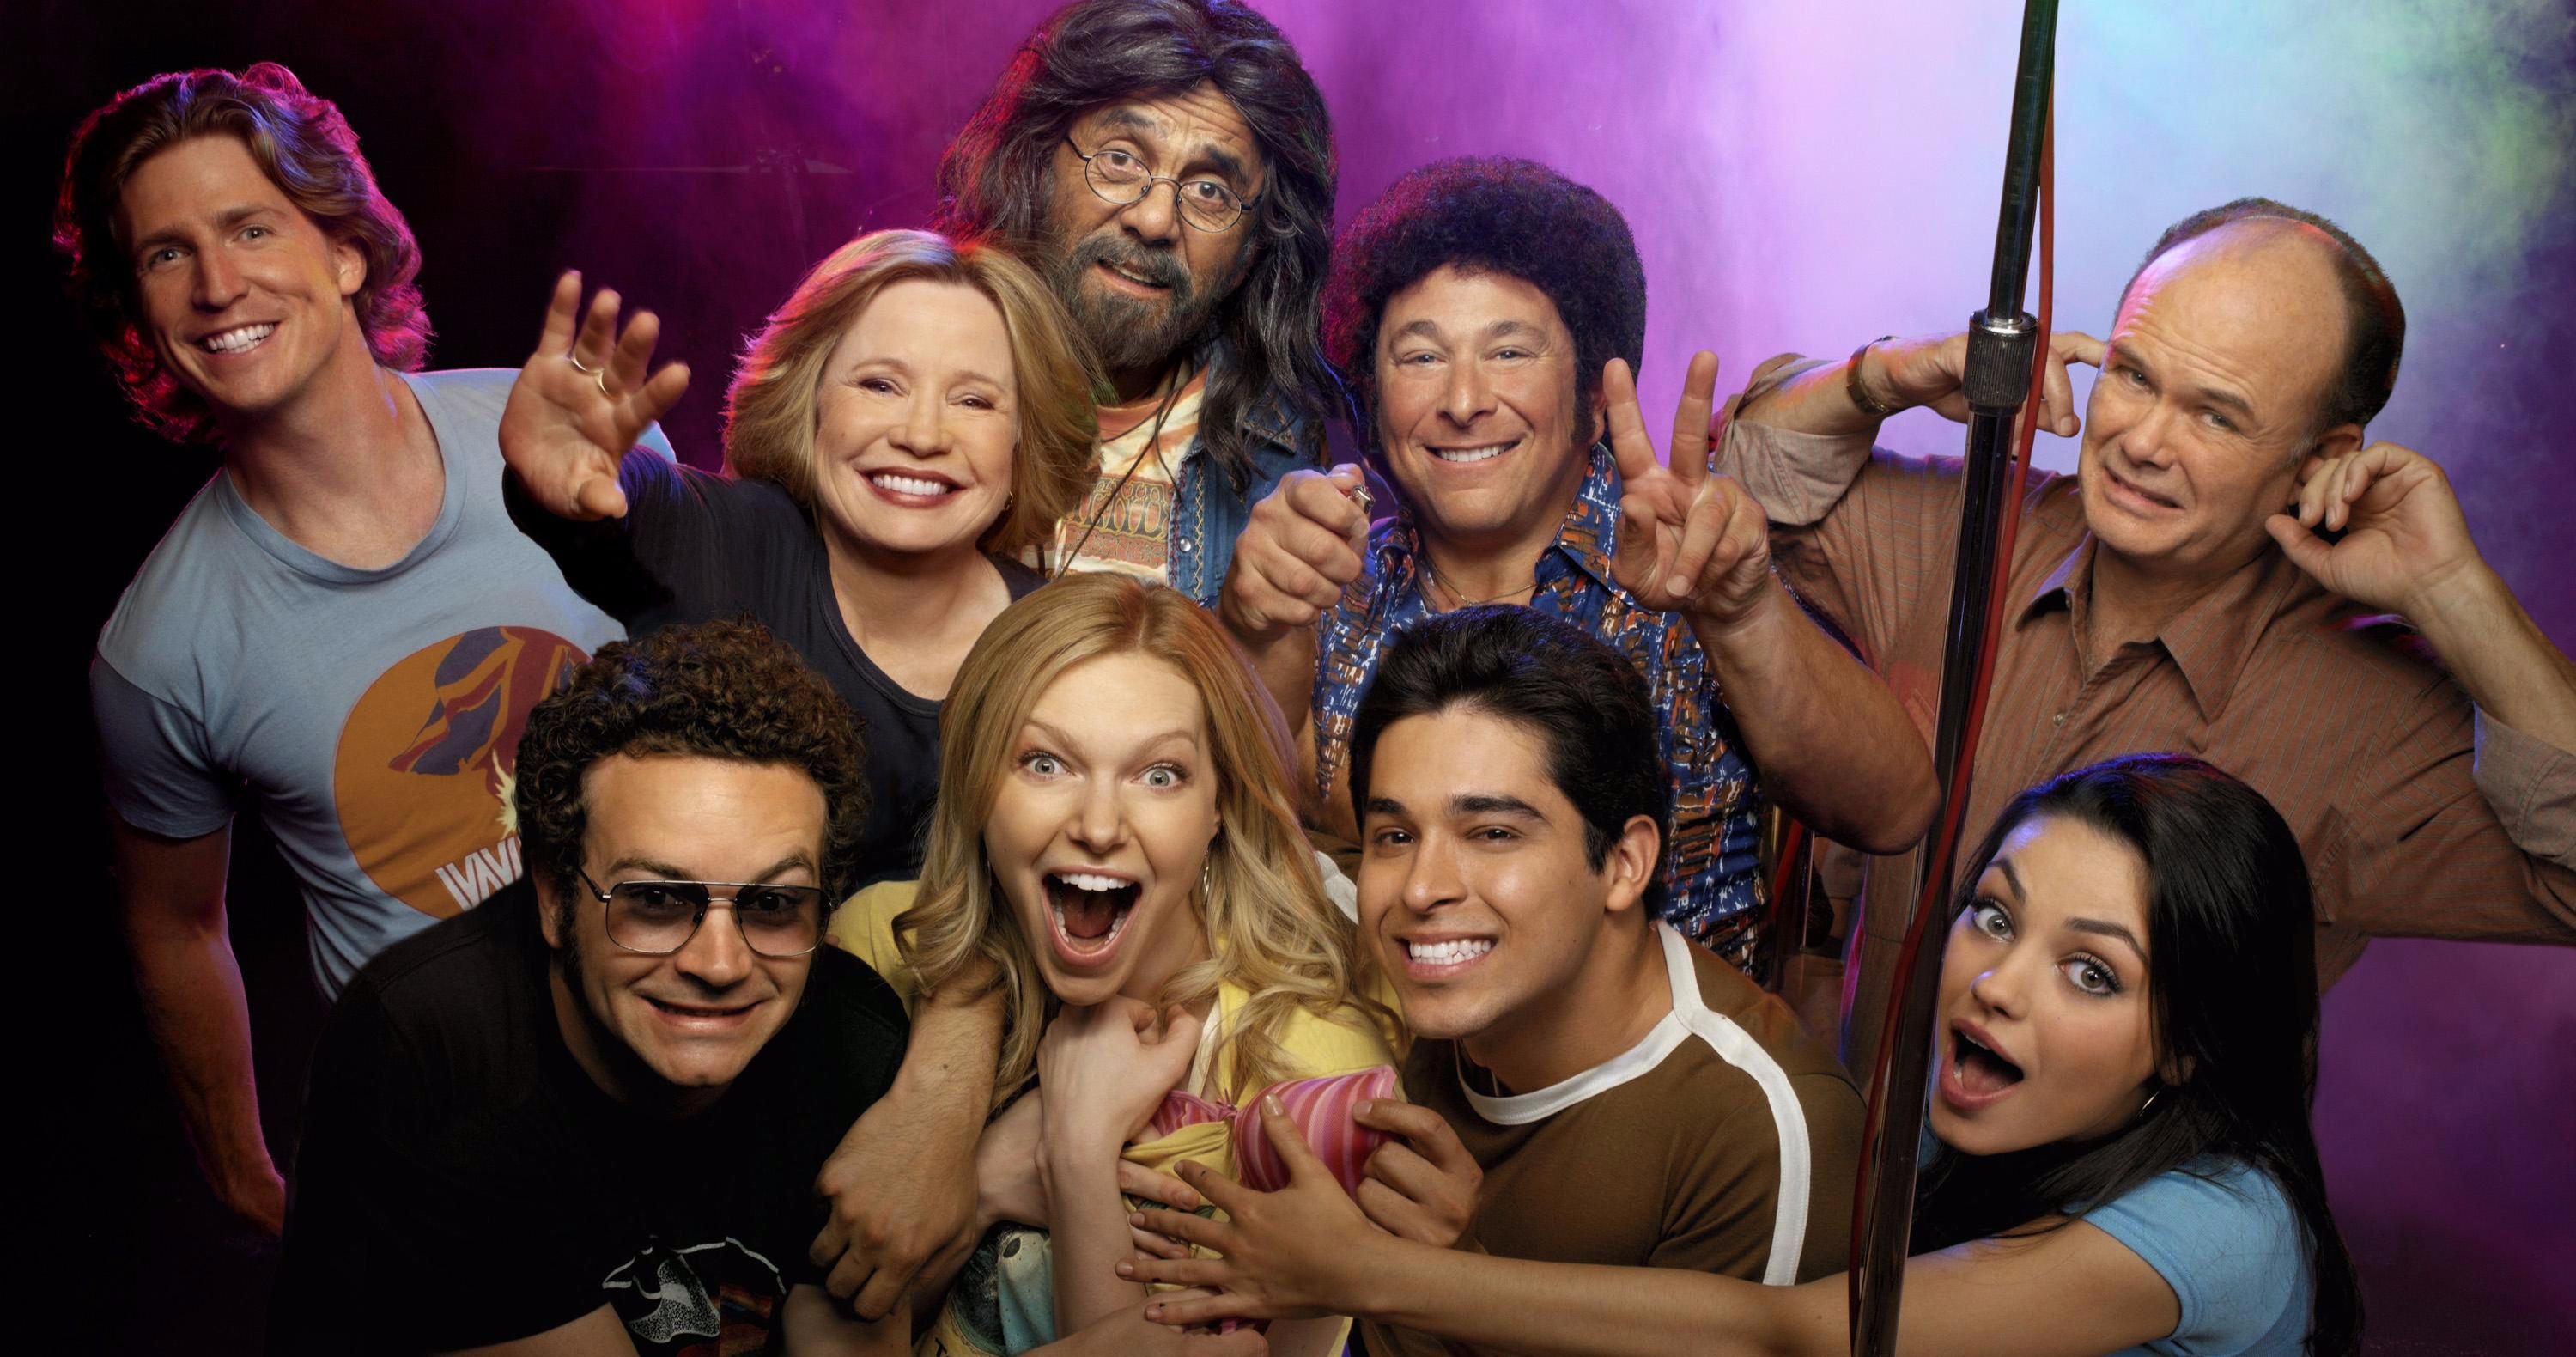 Tommy Chong Is Totally Interested in a That 70s Show Reunion or Revival [Exclusive]